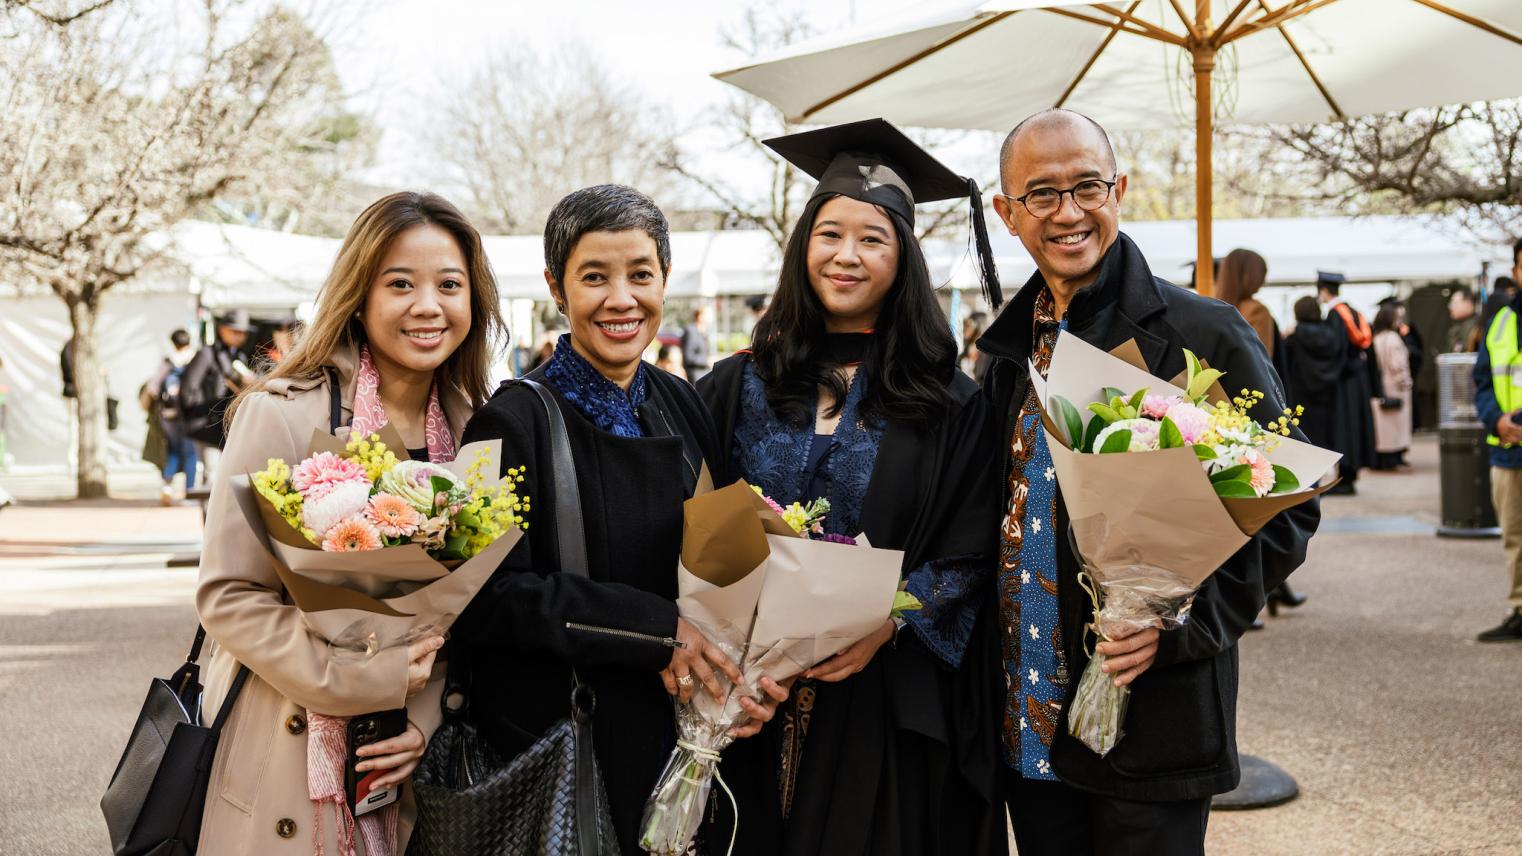 A family from the CAP graduations standing outdoors holding flowers and smiling